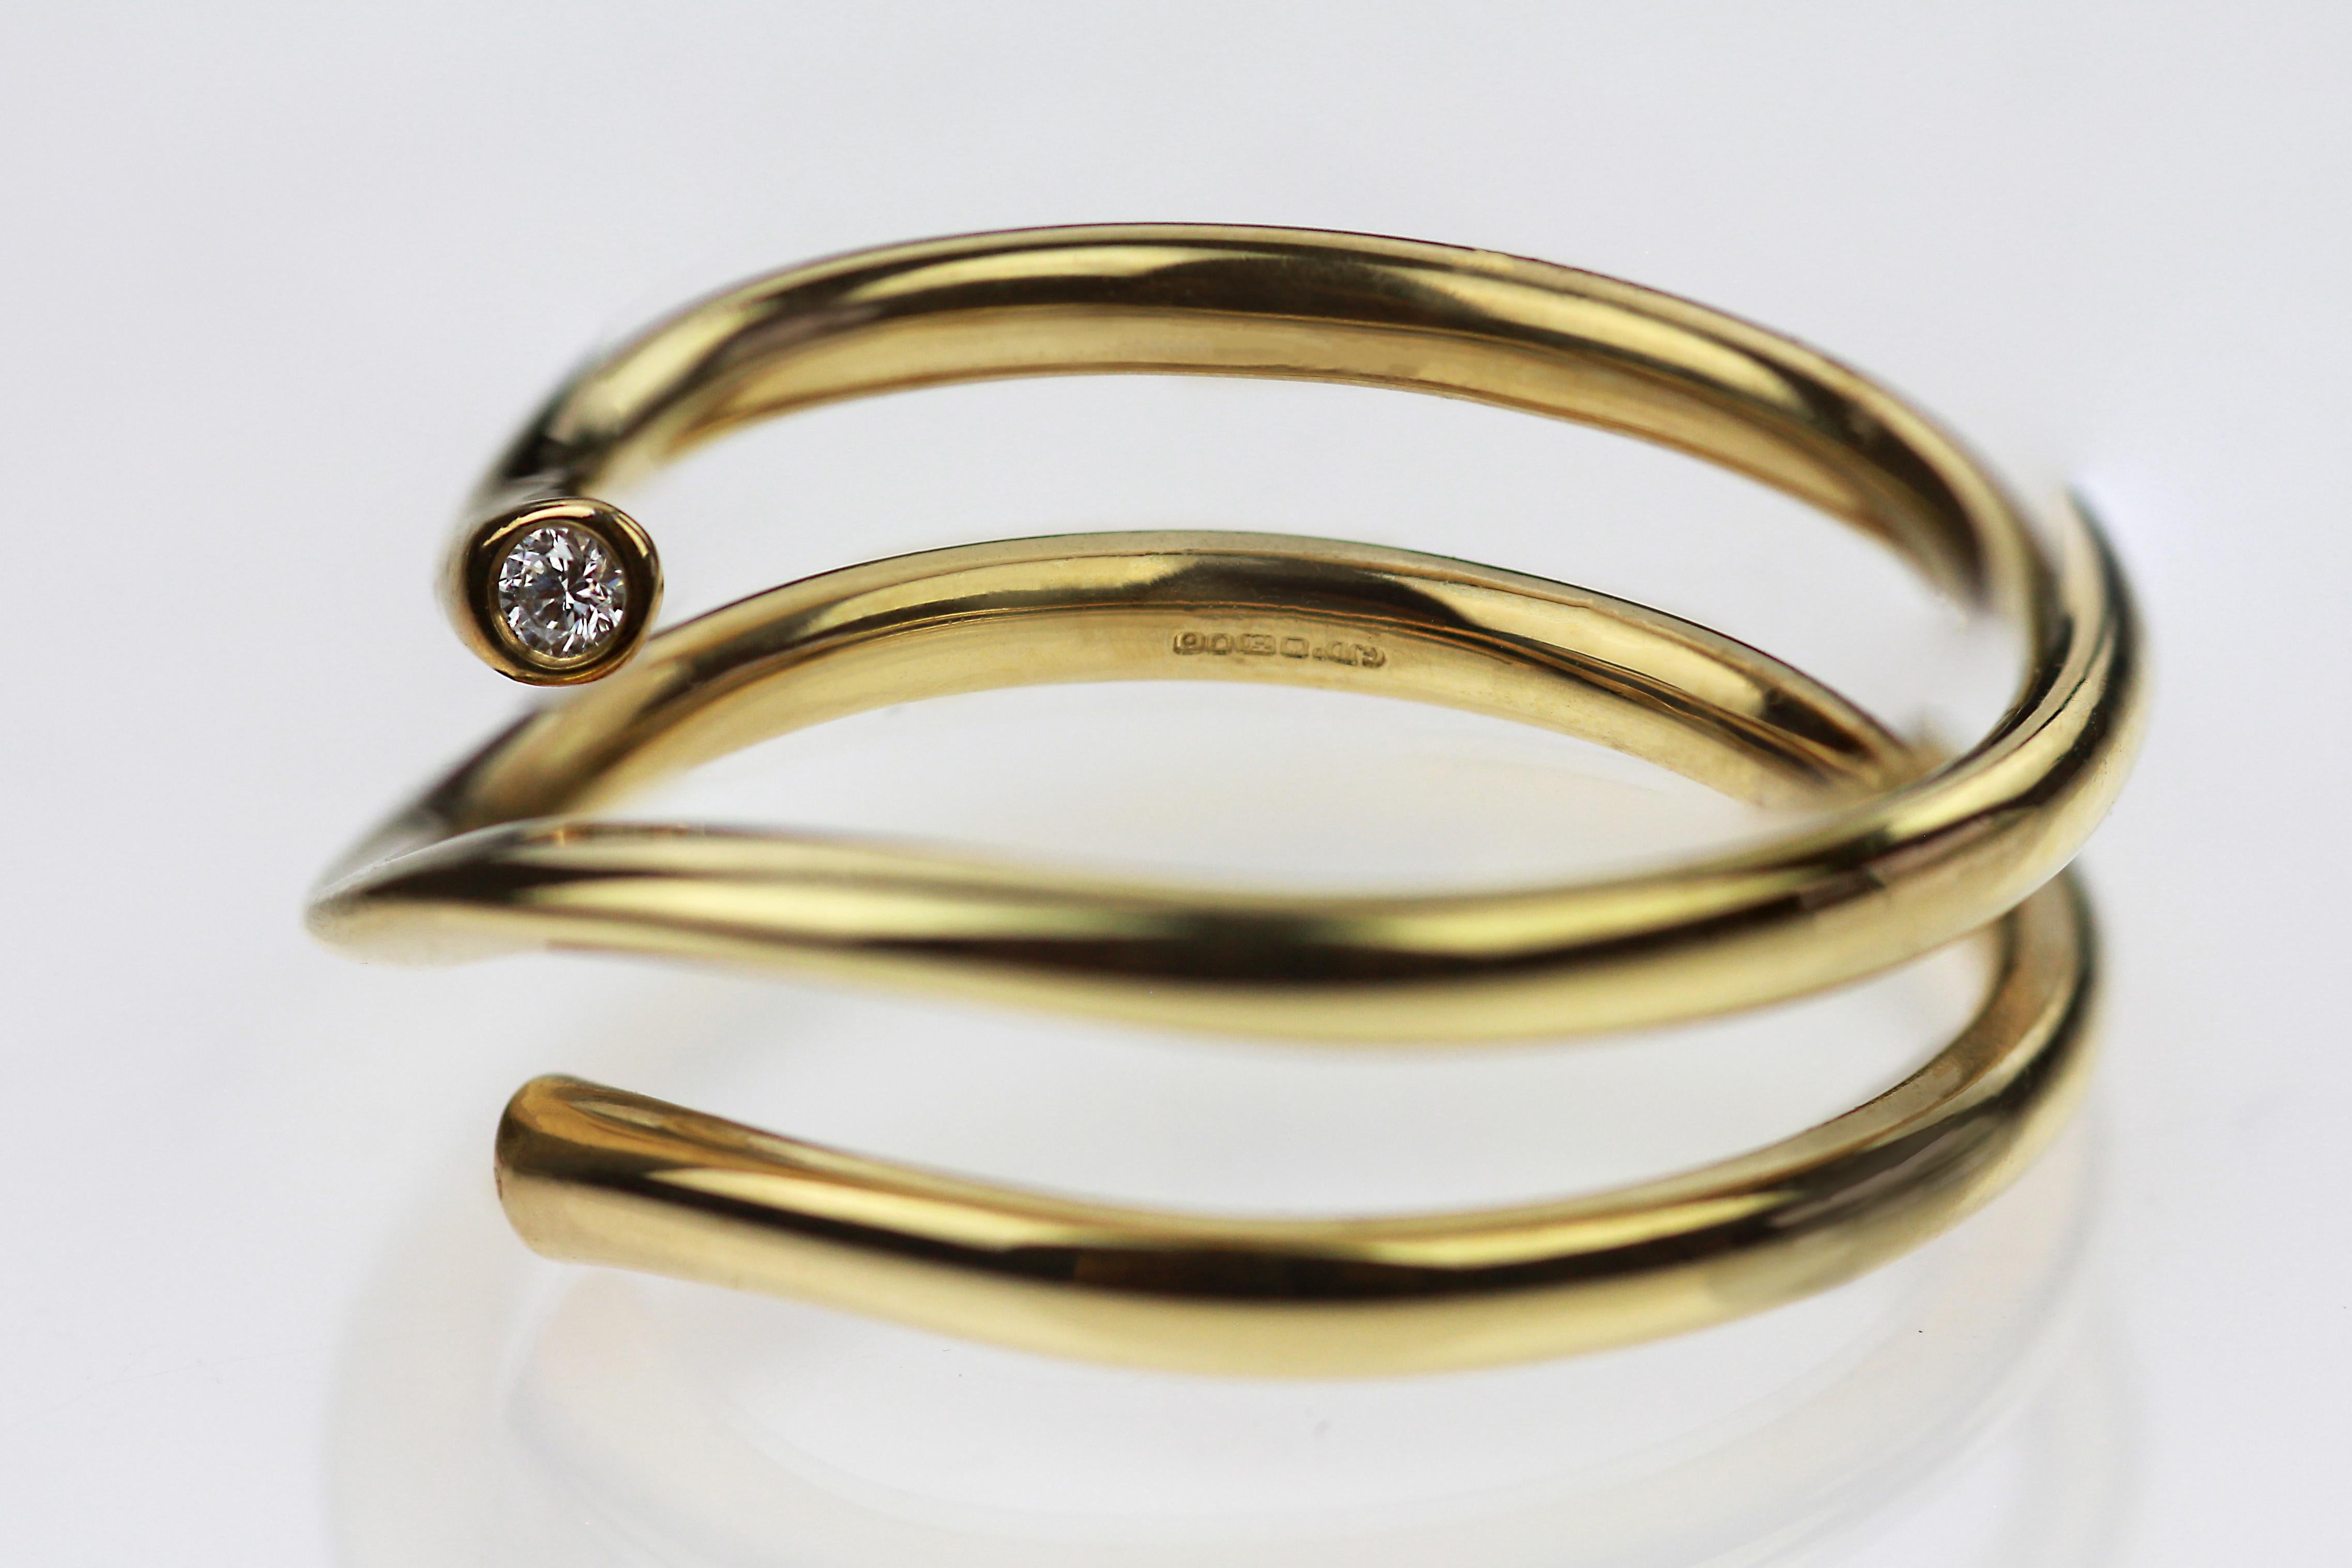 Could be wear with together with eternity ring. 
Sophisticated, this ring is a gorgeous piece waiting to be worn. The ring itself is a loosely coiled gold stream, resembling the slither of a snake or the joyous streamers floating in the air at